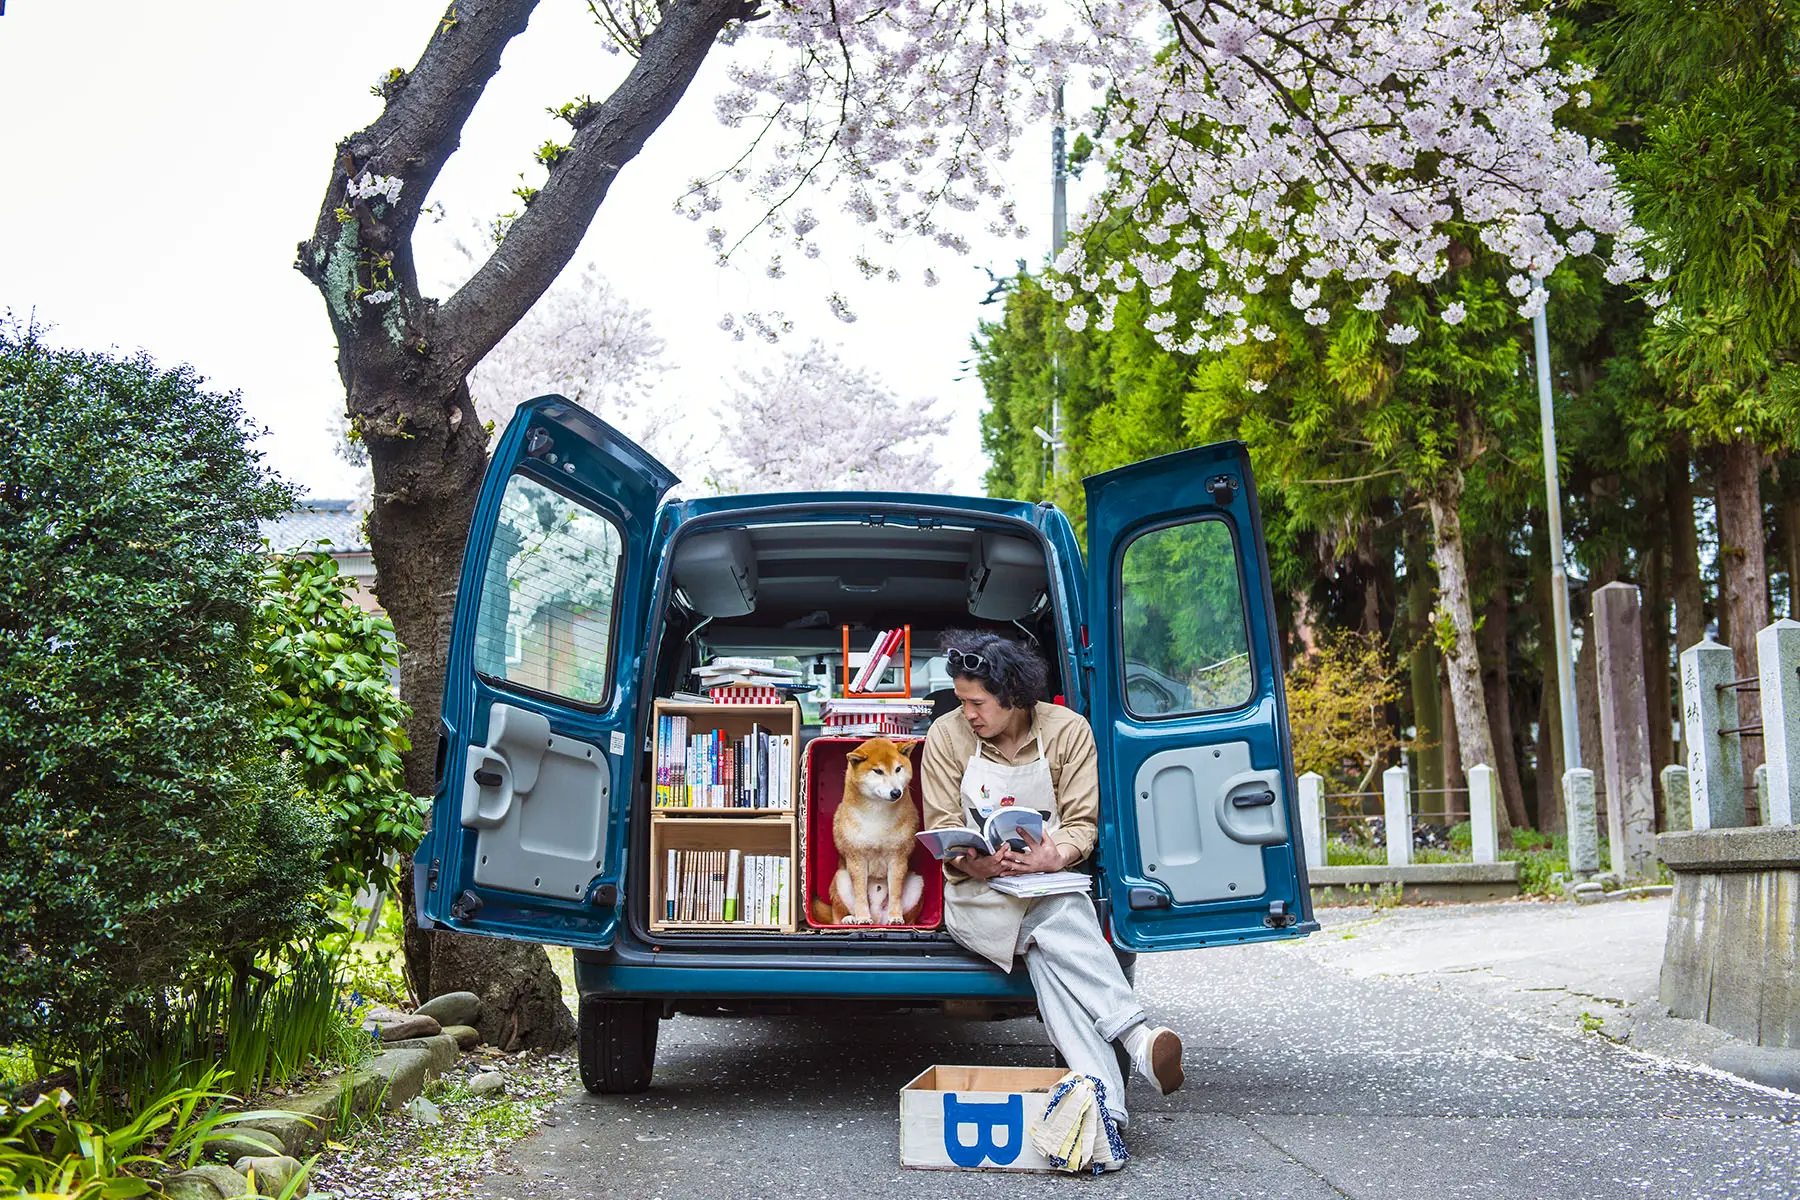 A man and a dog sitting in a van with open doors. The packed van is standing under cherry blossoms, and the man is sowing the dog a book.